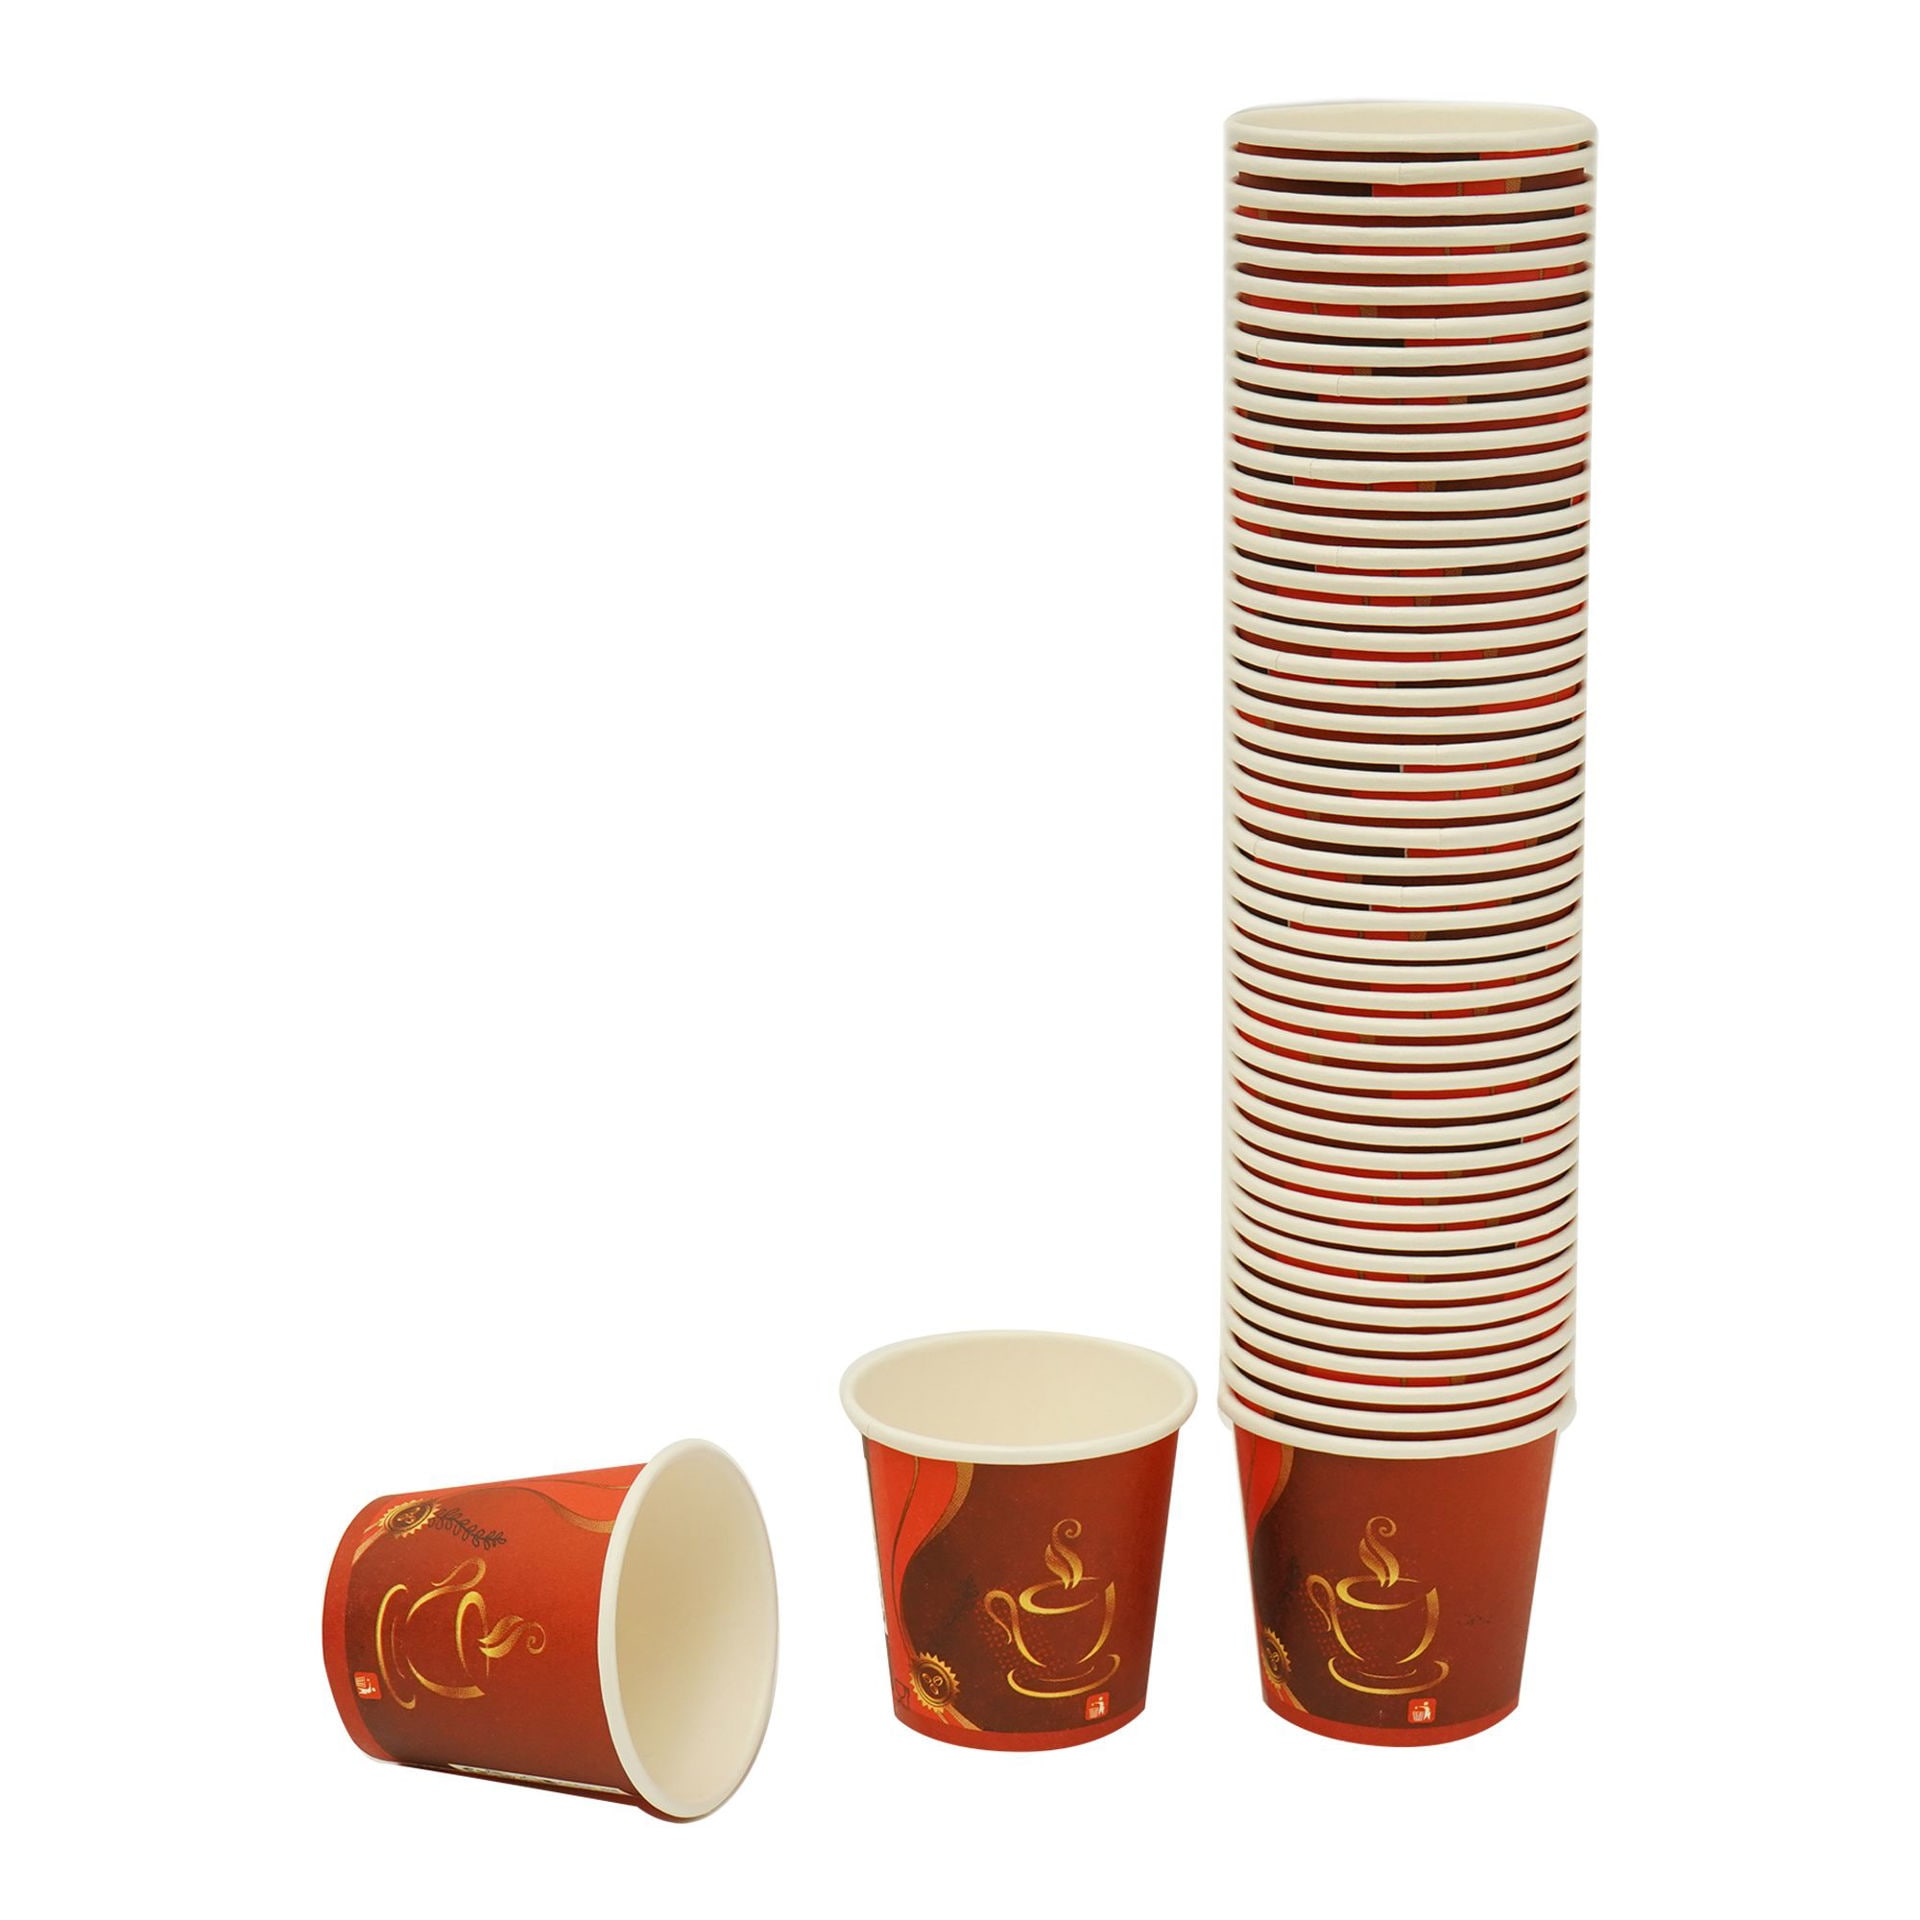 https://assets.dragonmart.ae//pictures/0651407_ideal-pack-disposable-paper-cups-4oz-pack-of-50pcs-red.jpeg